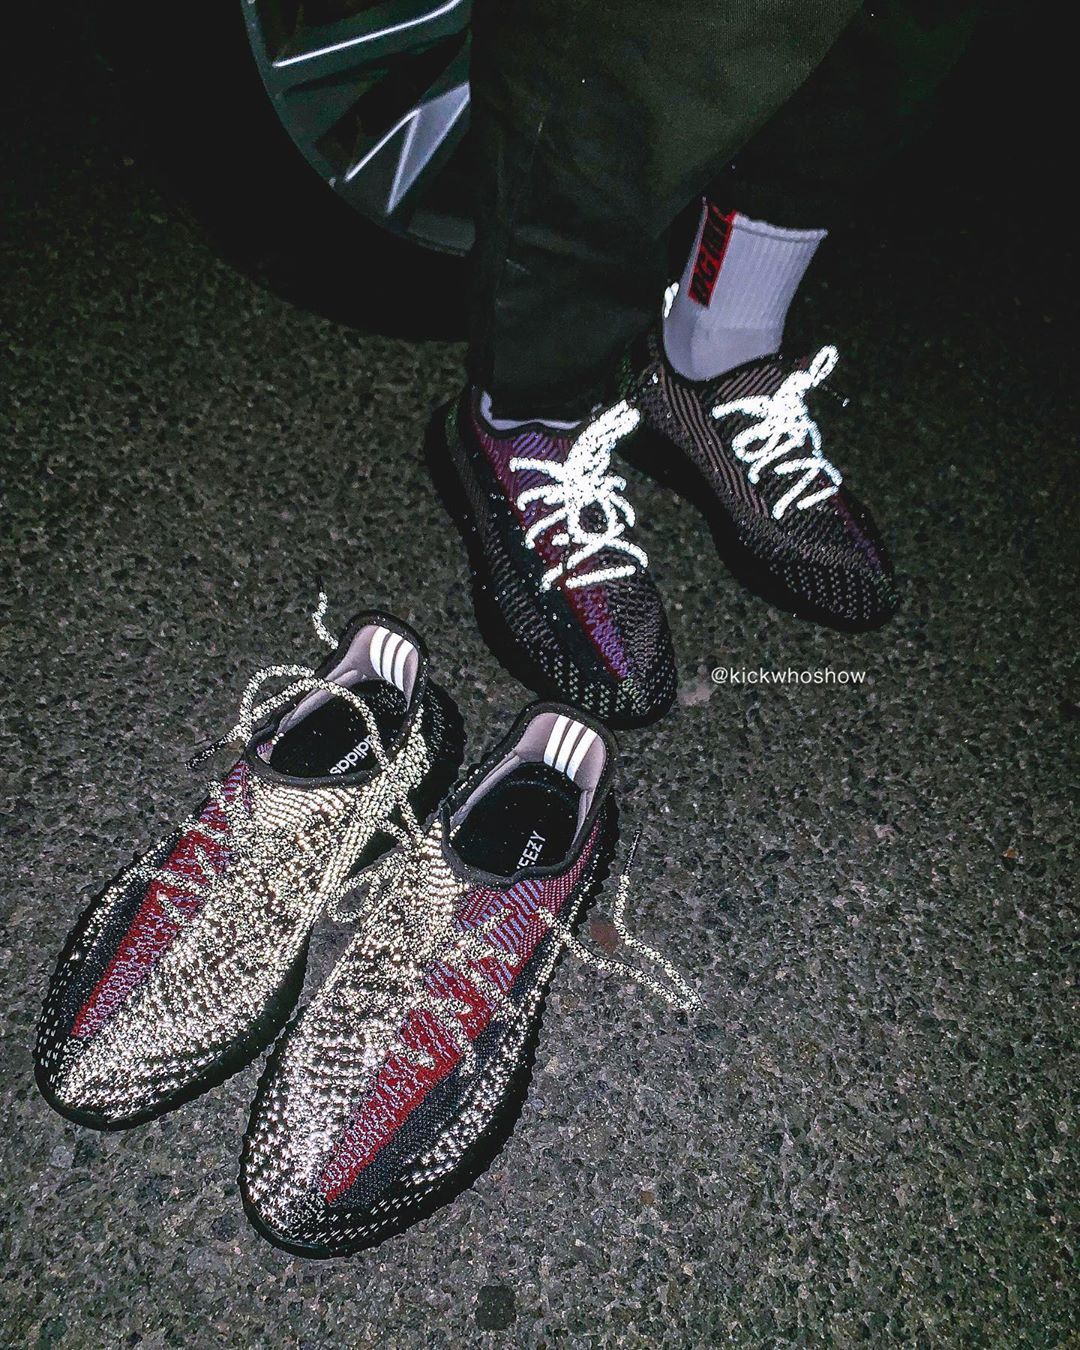 How to spot fake Adidas Yeezy Boost 350 Turtle Dove in 36